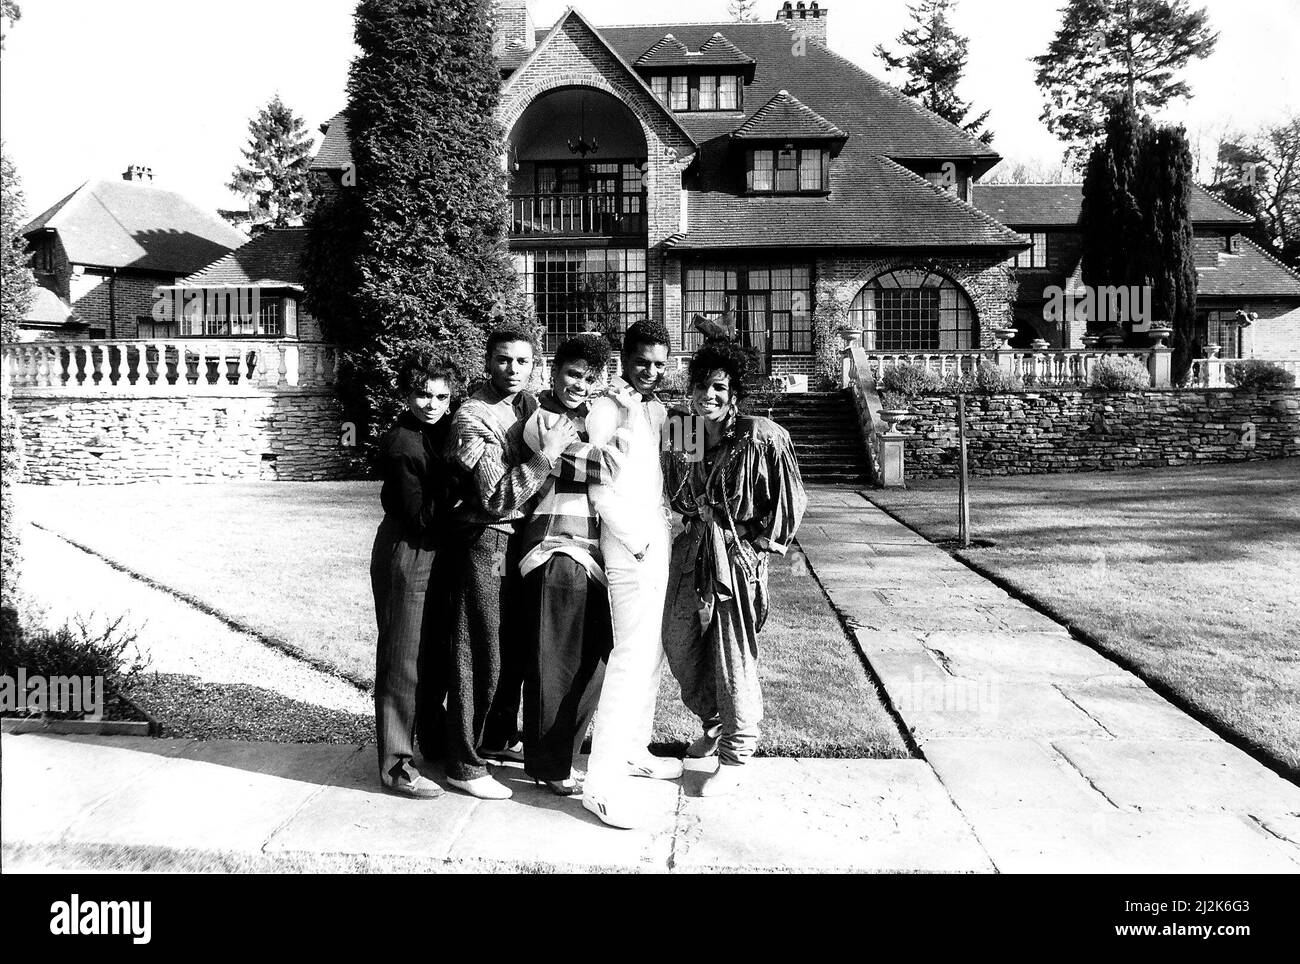 Five Star pop group outside their new home Stone Court  in Berkshire, March 1987.  Five Star (also 5 Star) are a British pop and R&B group, formed in 1983. Comprising siblings Stedman, Lorraine, Deniece, Doris and Delroy Pearson,  known for their flamboyant image, matching costumes and heavily choreographed dance routines. Five Star achieved a string of Top 40 singles and albums in the UK between 1985 and 1988. Stock Photo